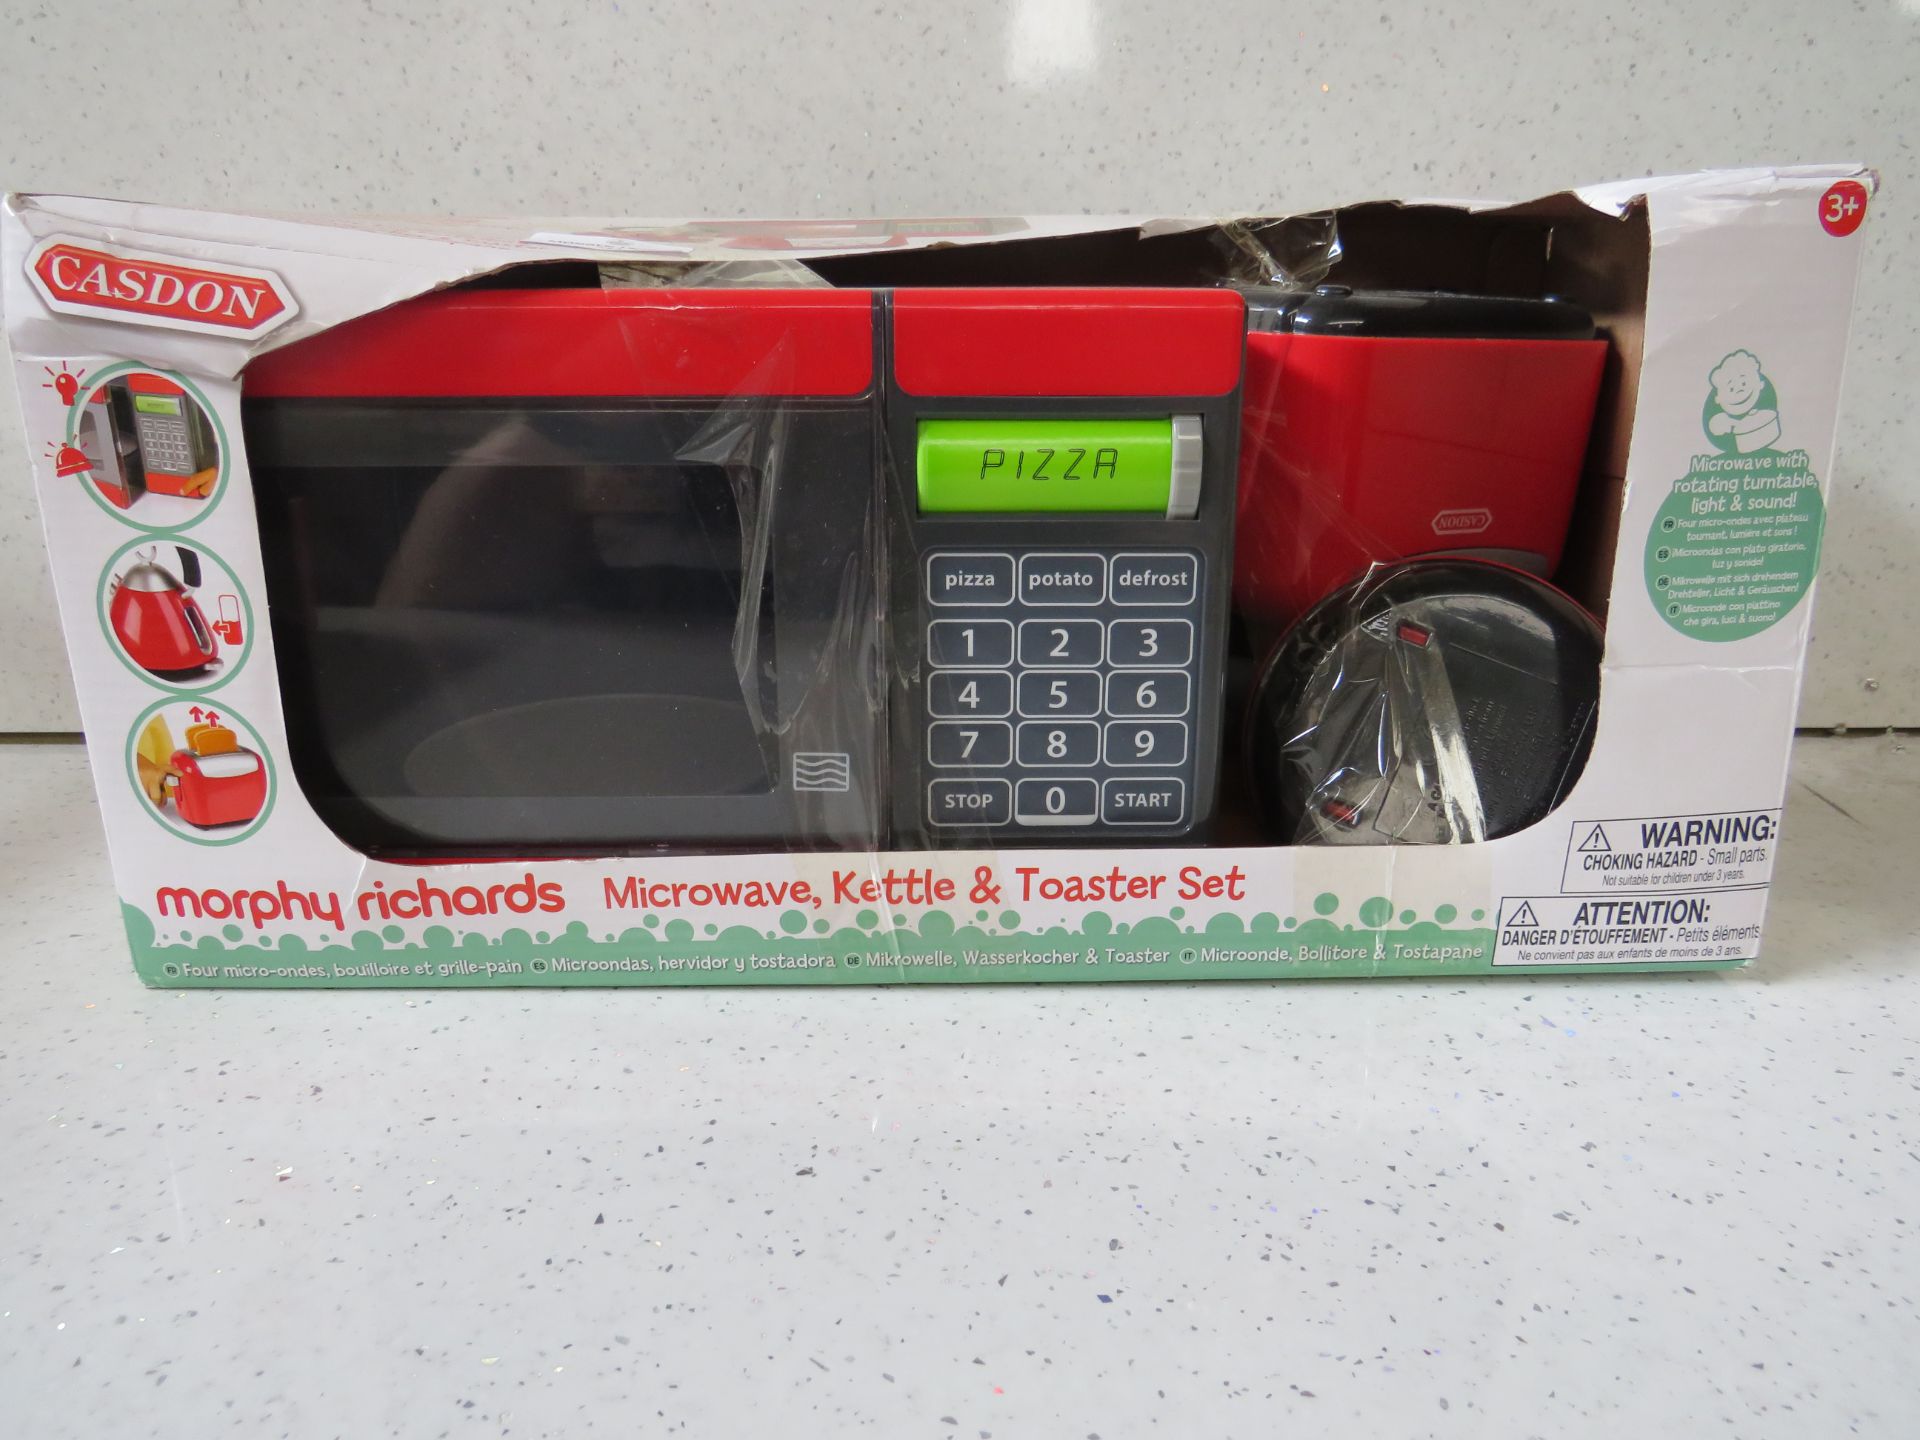 Casdon - Morphy Richards Microwave, Kettle & Toaster Playset - Unchecked, Box Damaged.